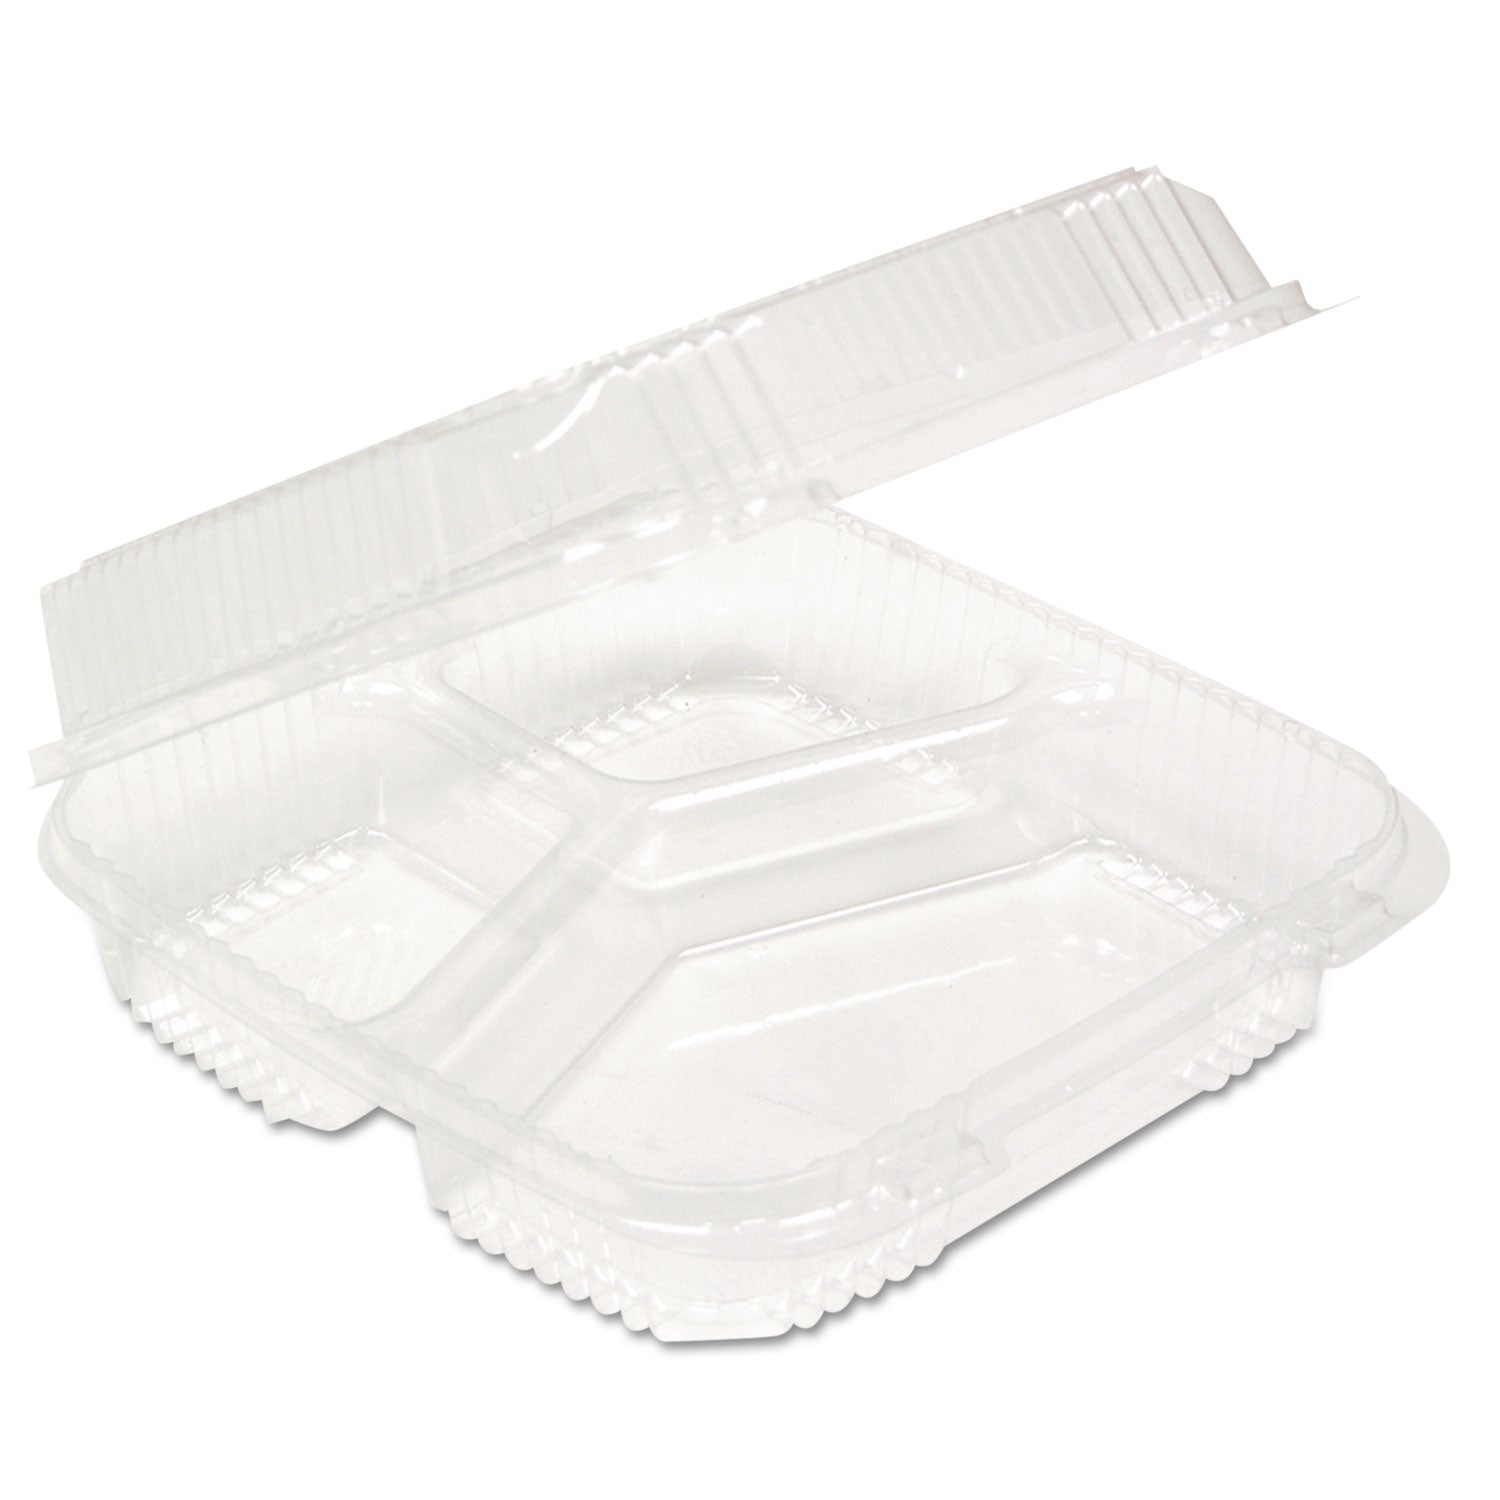 clearview-smartlock-hinged-lid-container-3-compartment-5-oz-14-oz-82-x-834-x-291-clear-plastic-200-carton_pctyci81123 - 1